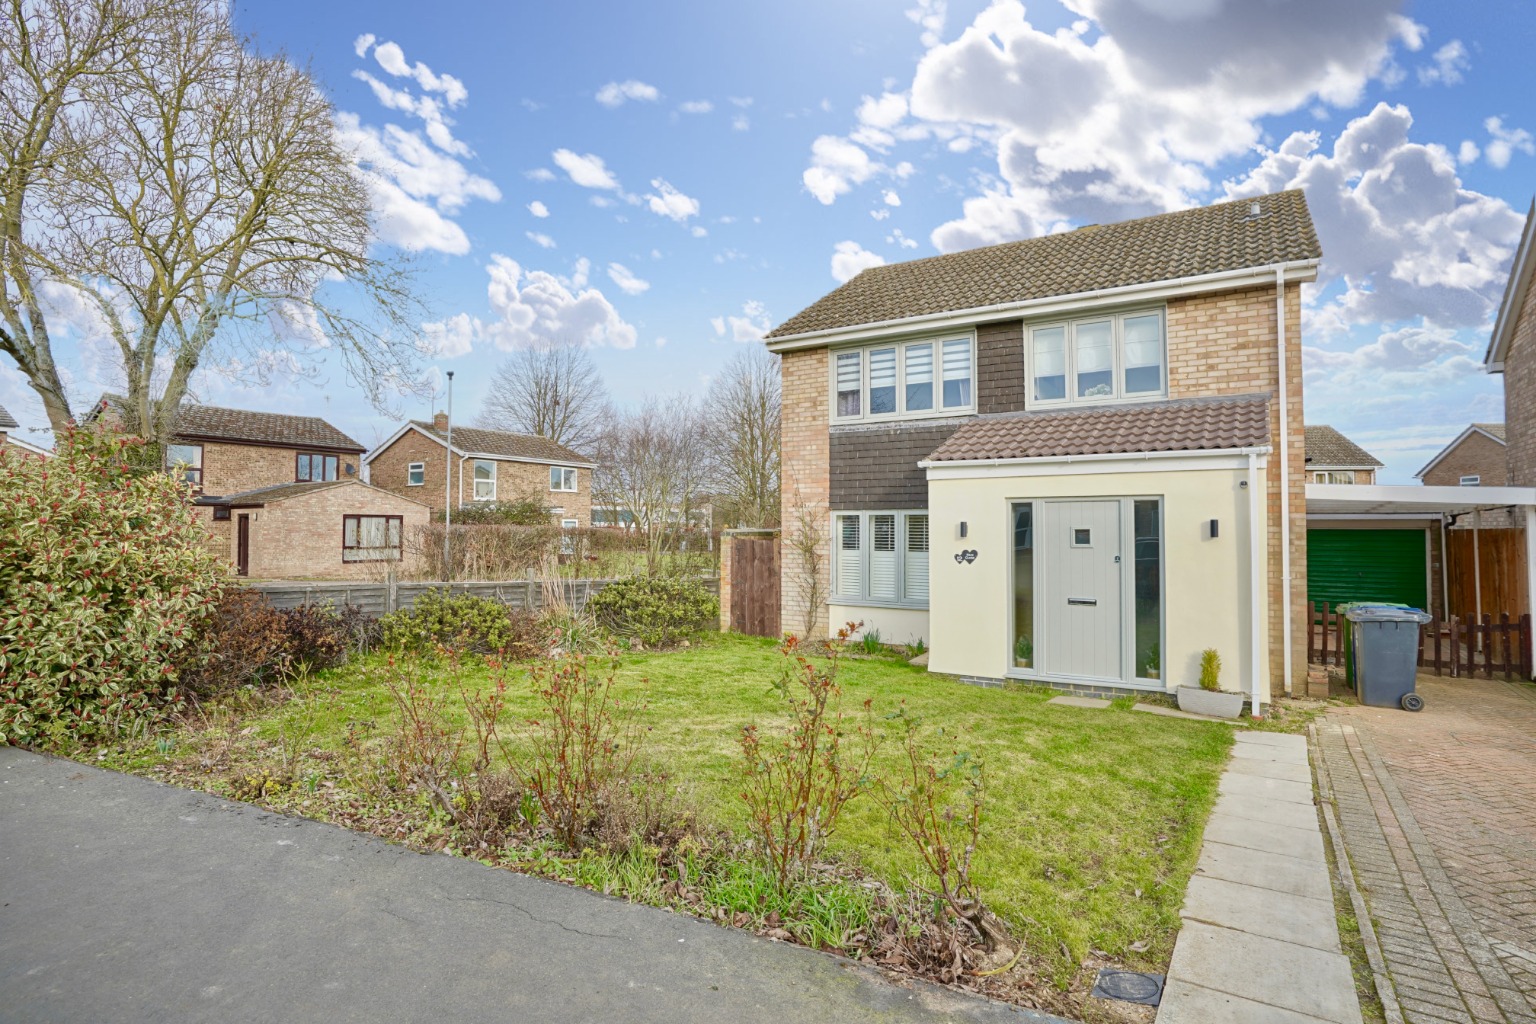 3 bed detached house for sale in Kiln Close, St. Ives, PE27